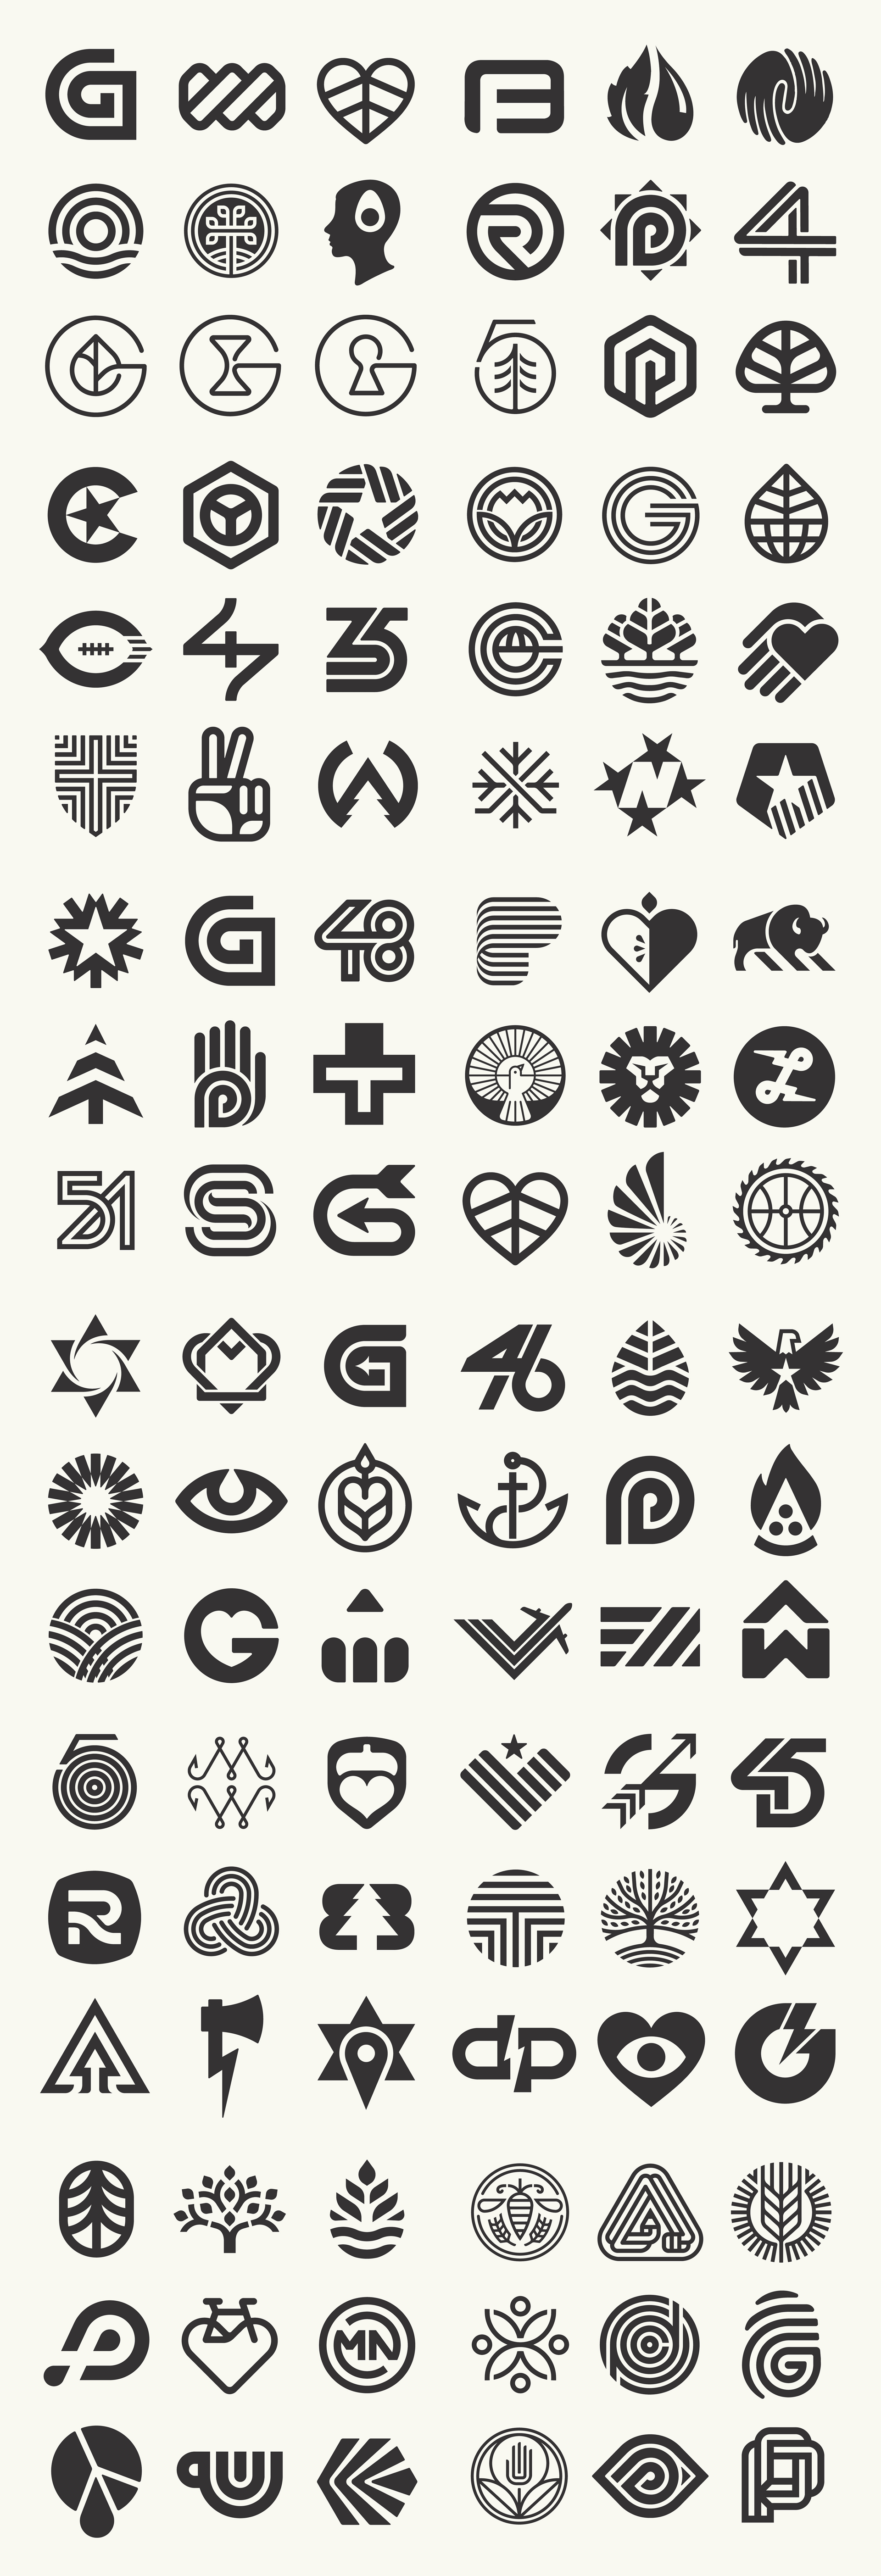 Best Logo Designs from 20 Years by Peters Design Co.